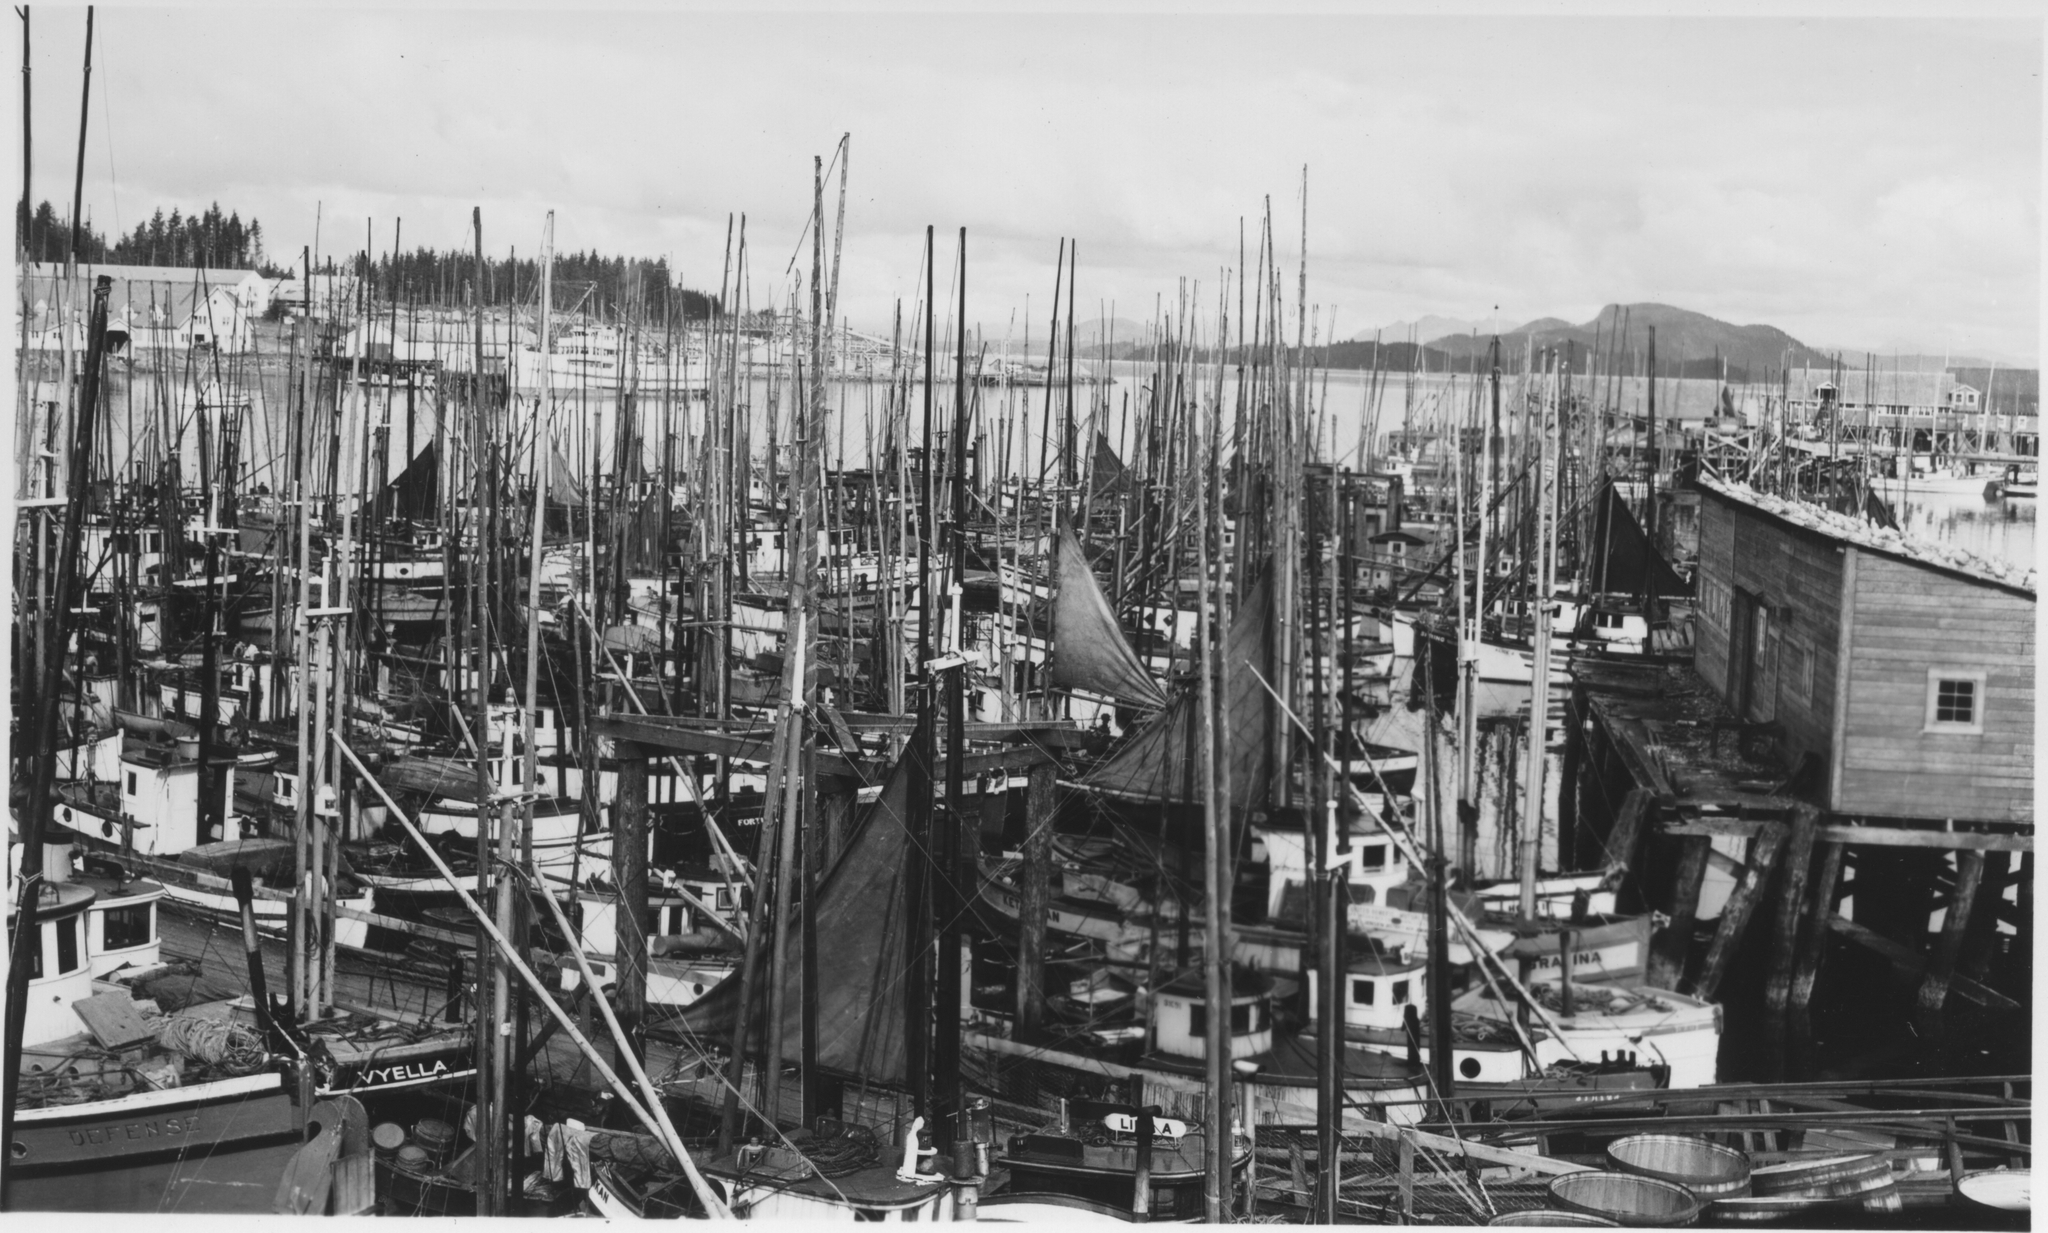 Fishing boats in a Sitka Harbor. Courtesy of The Sitka History Museum.